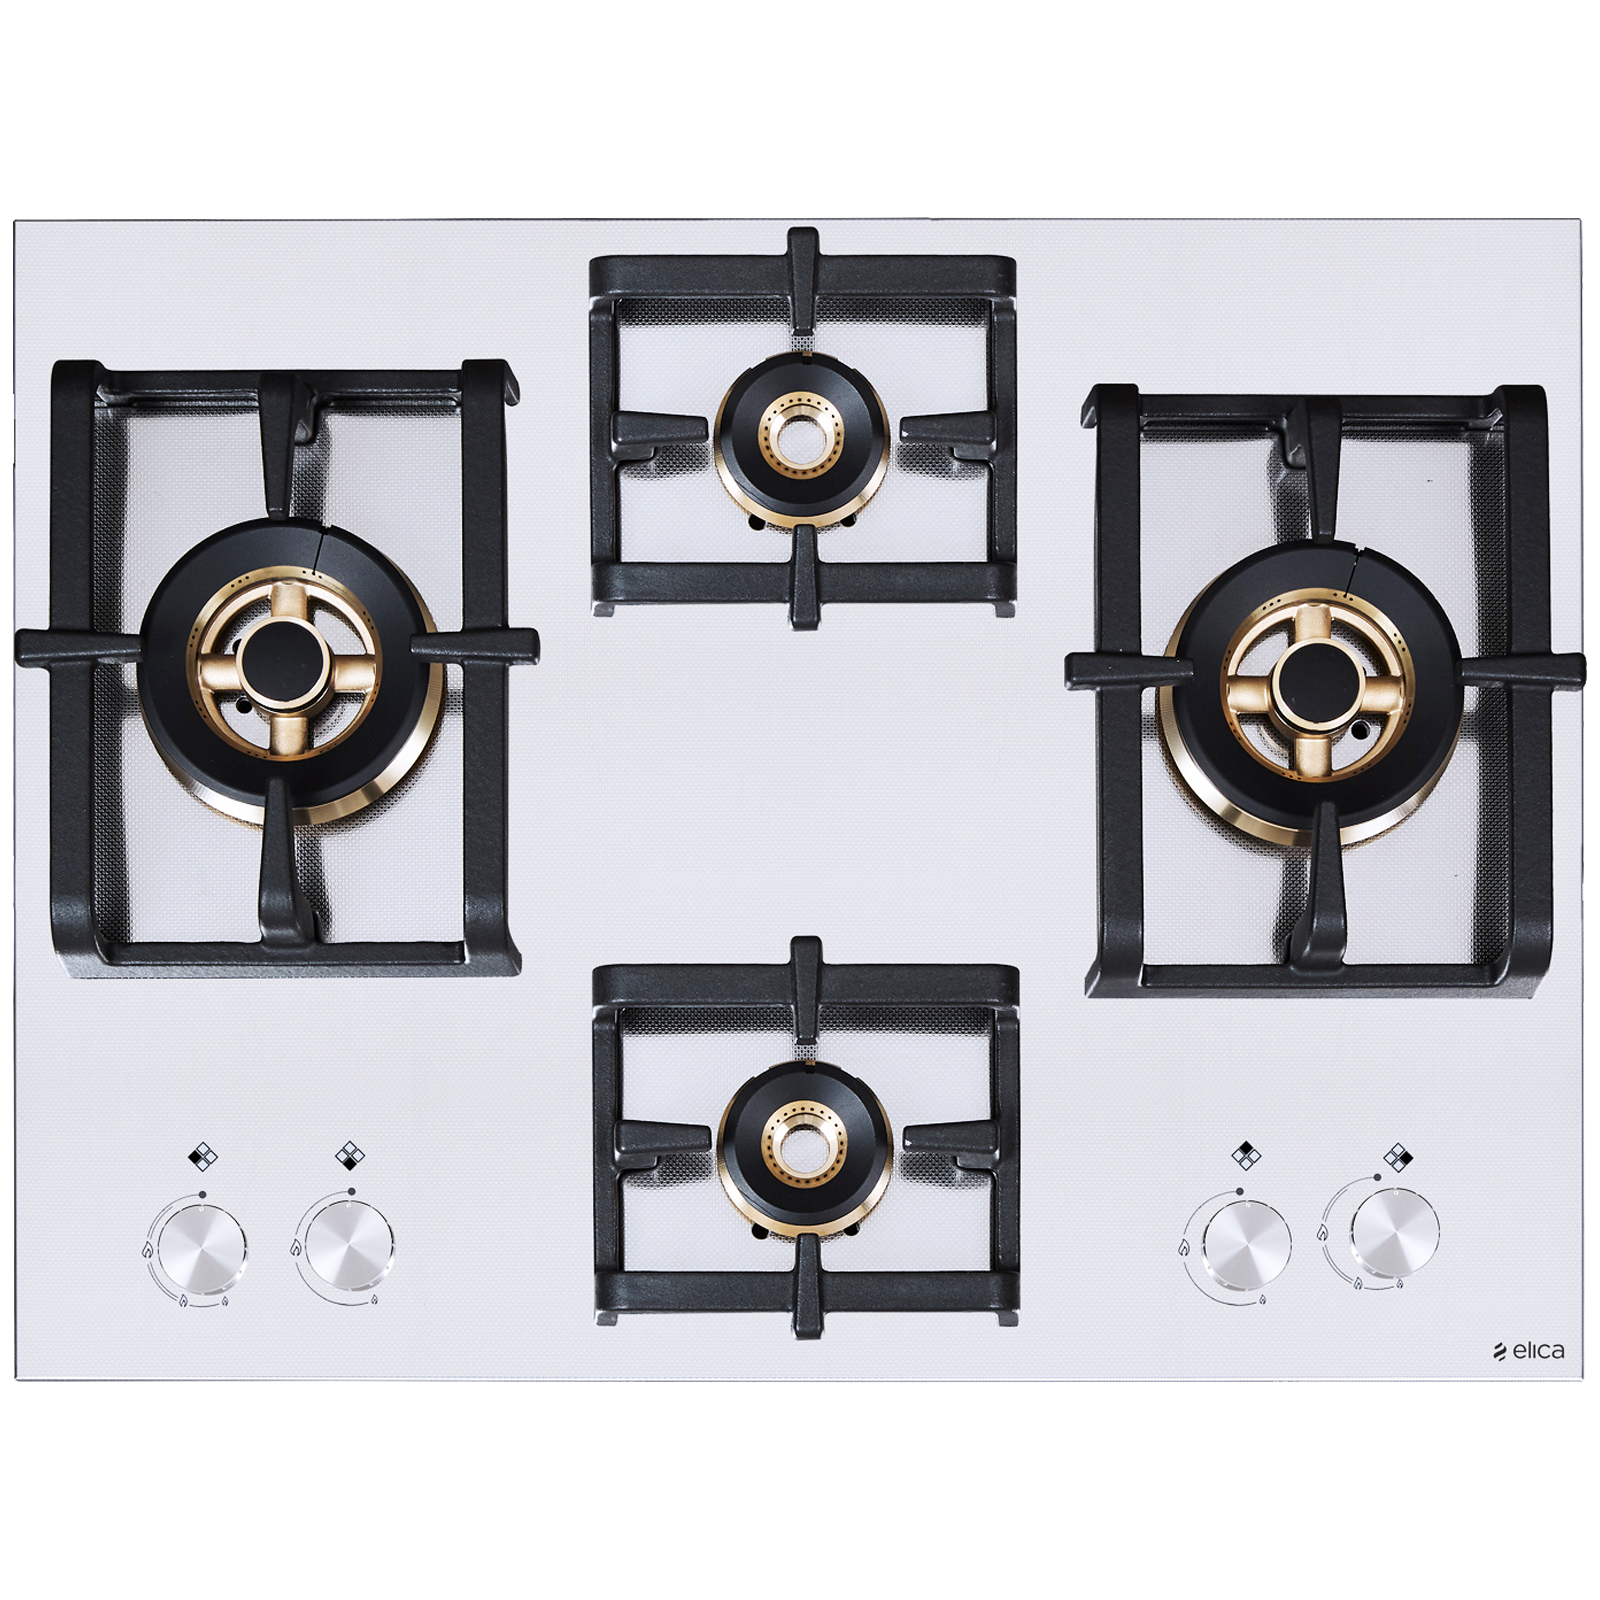 Elica Inox Pro FB MFC 4B 70 DX 4 Burner Stainless Steel Built-in Gas Hob (Cast Iron Grids, 3023, Steel)_1